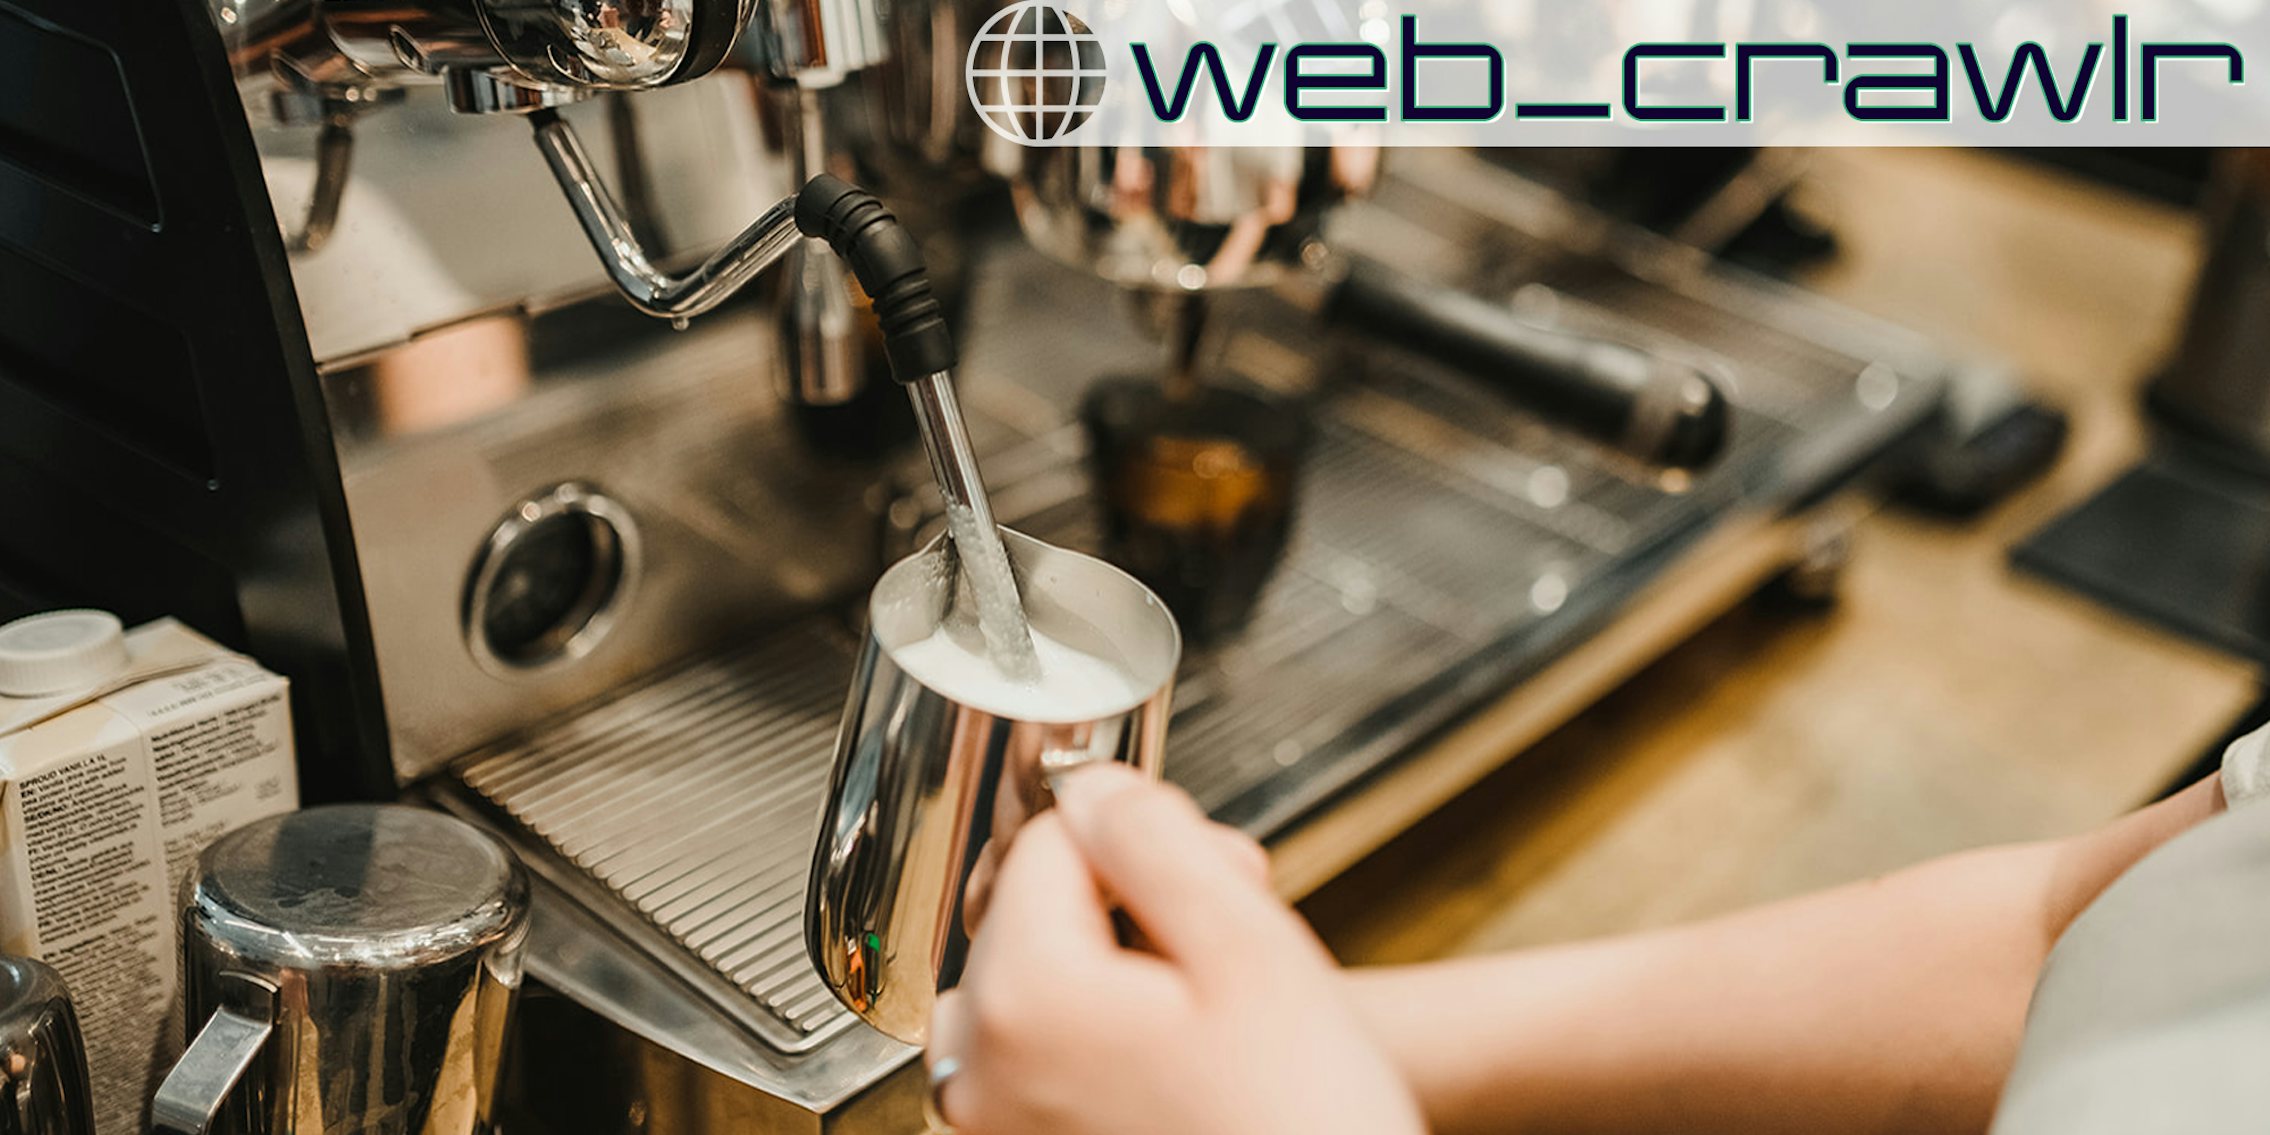 A barista making coffee. The Daily Dot newsletter web_crawlr logo is in the top right corner.